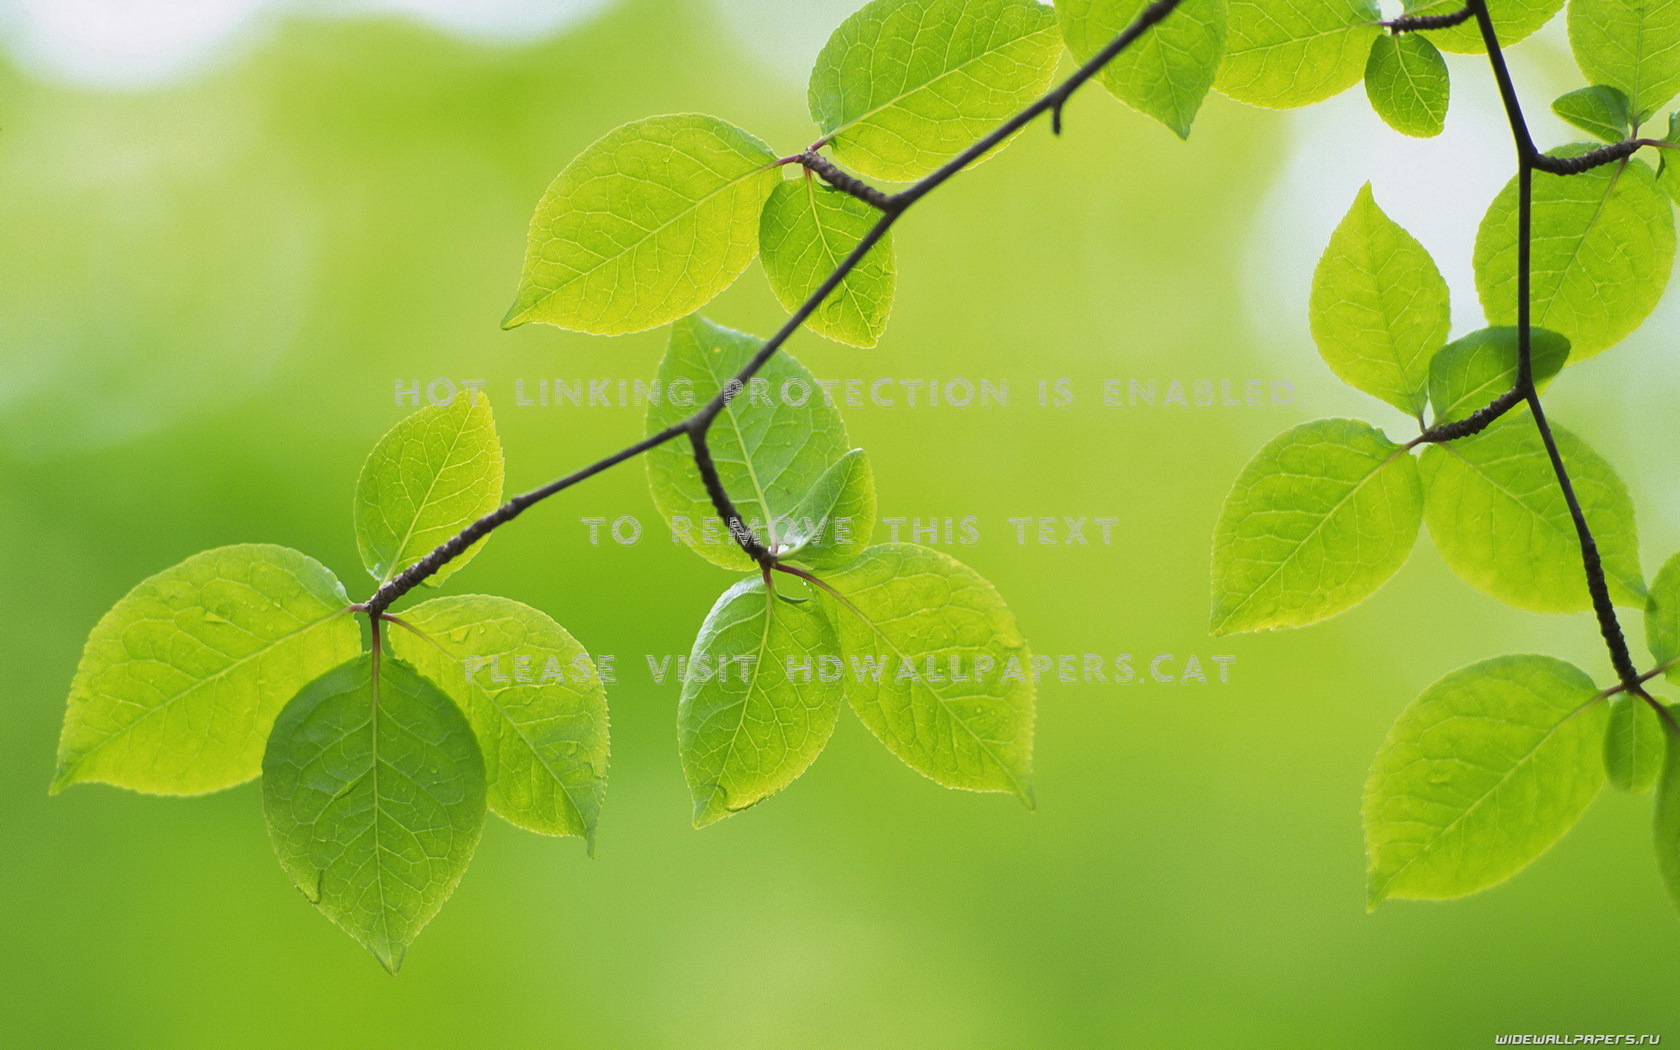 1 Oh Hani Good Nature - Leaves Background Images Hd - HD Wallpaper 